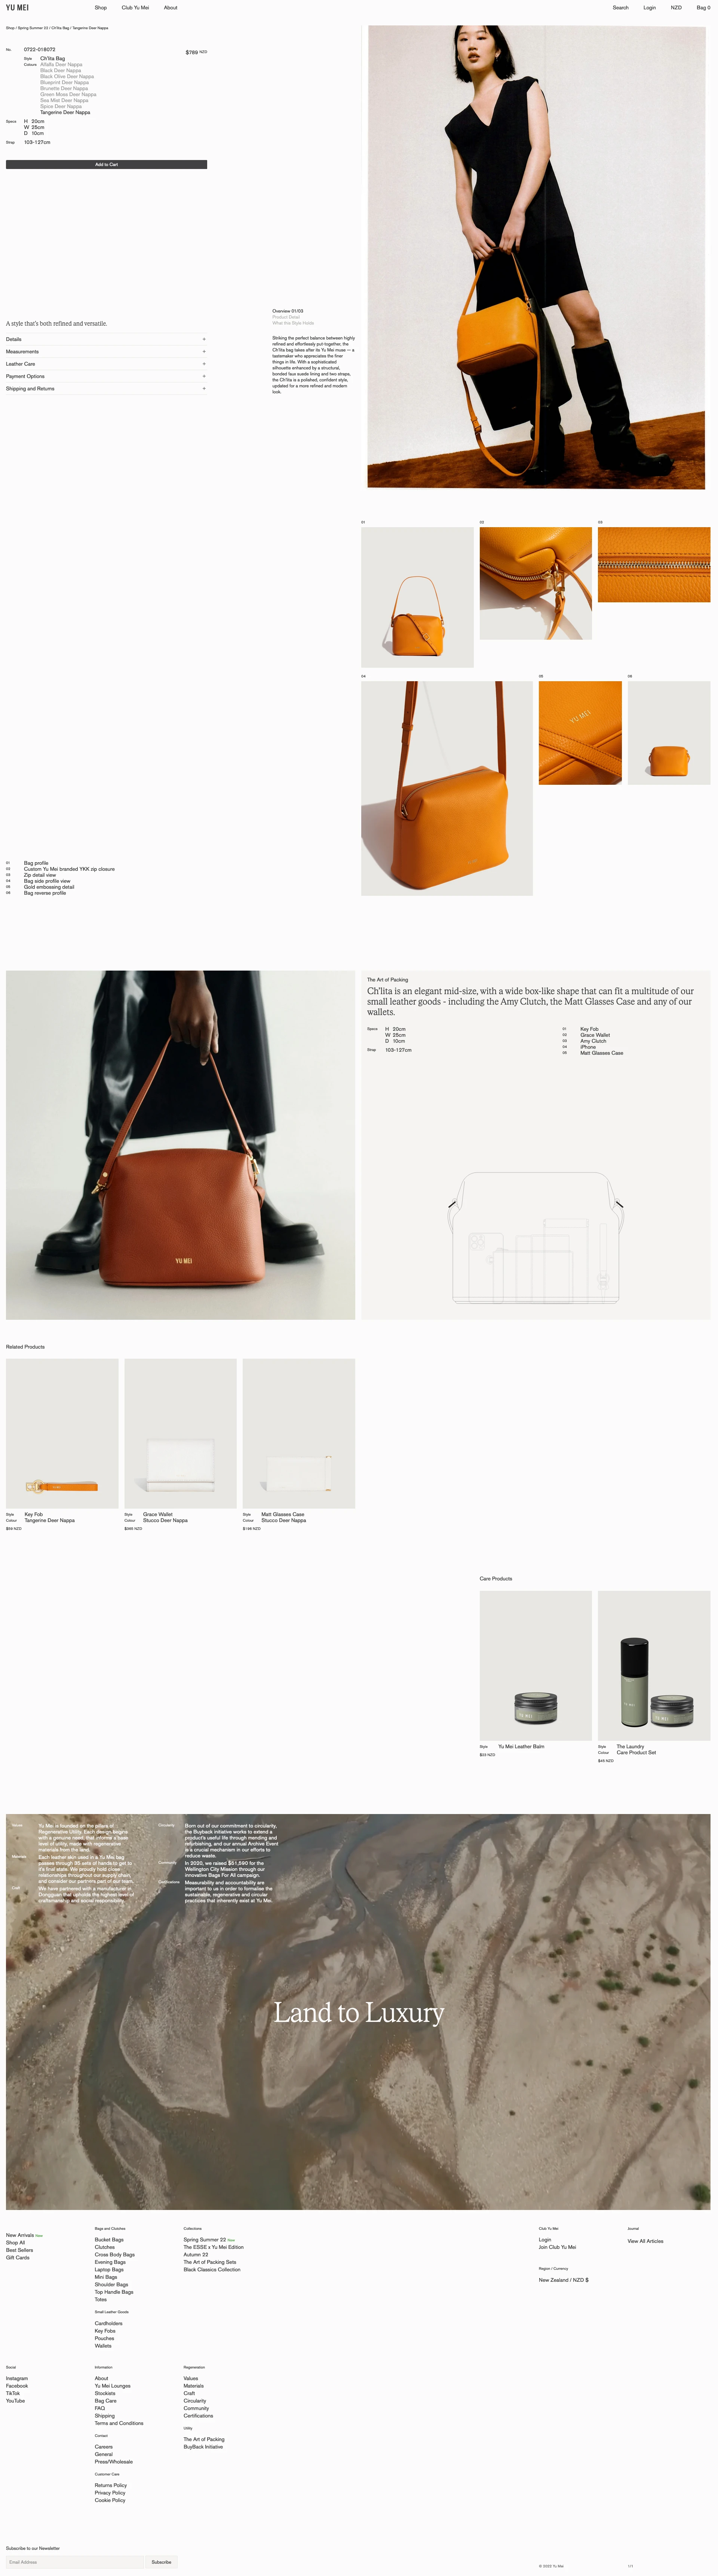 Yu Mei Landing Page Example: New Zealand-based leather goods label with a focus on utilitarian design, made for modern people seeking a new form of understated luxury.